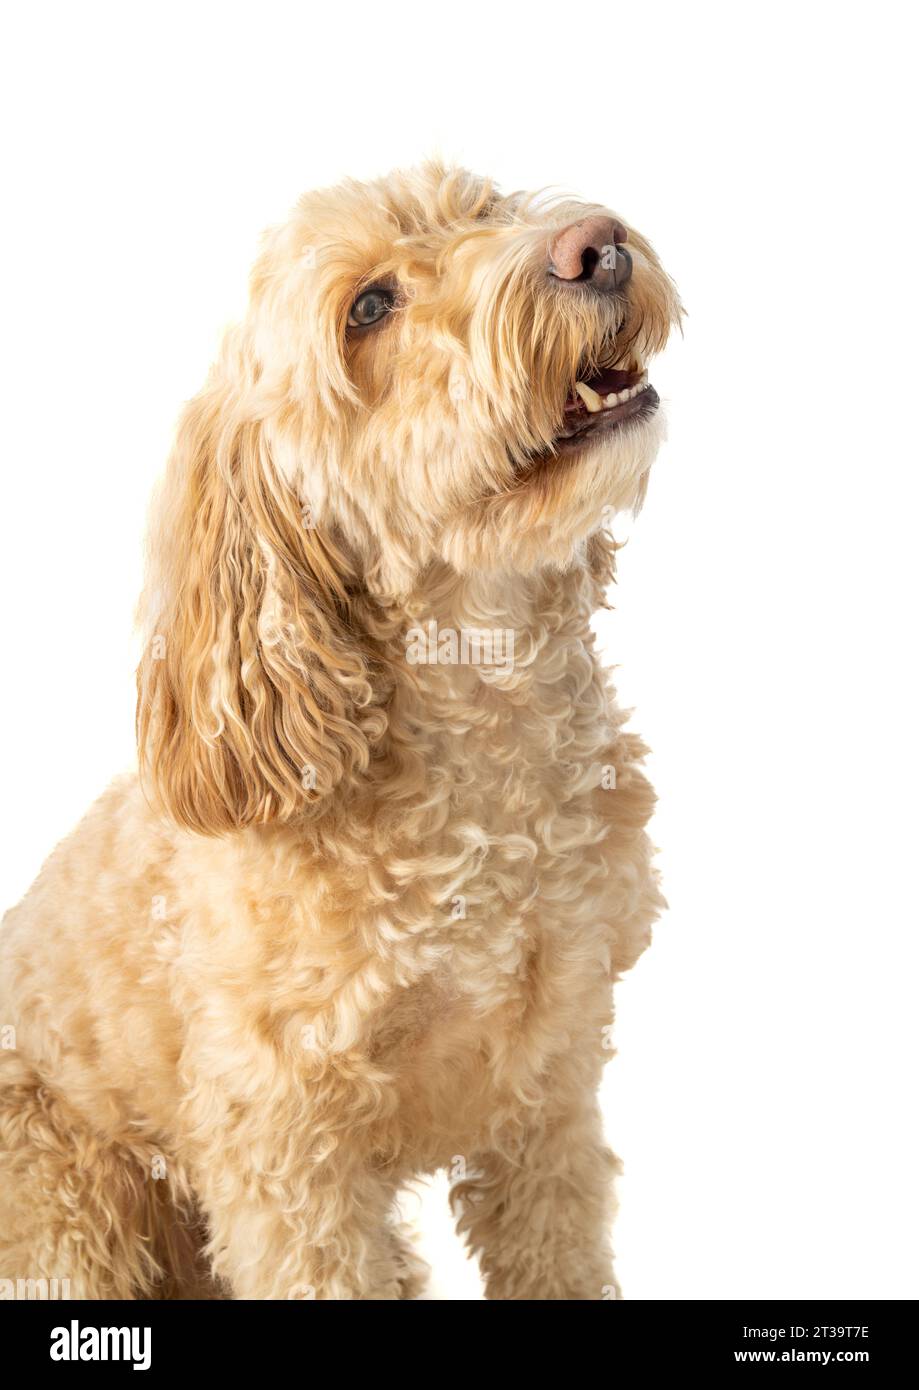 Blonde Cockapoo dog in side view, sitting attentively on a white background, head tilted upward awaiting owner's command Stock Photo